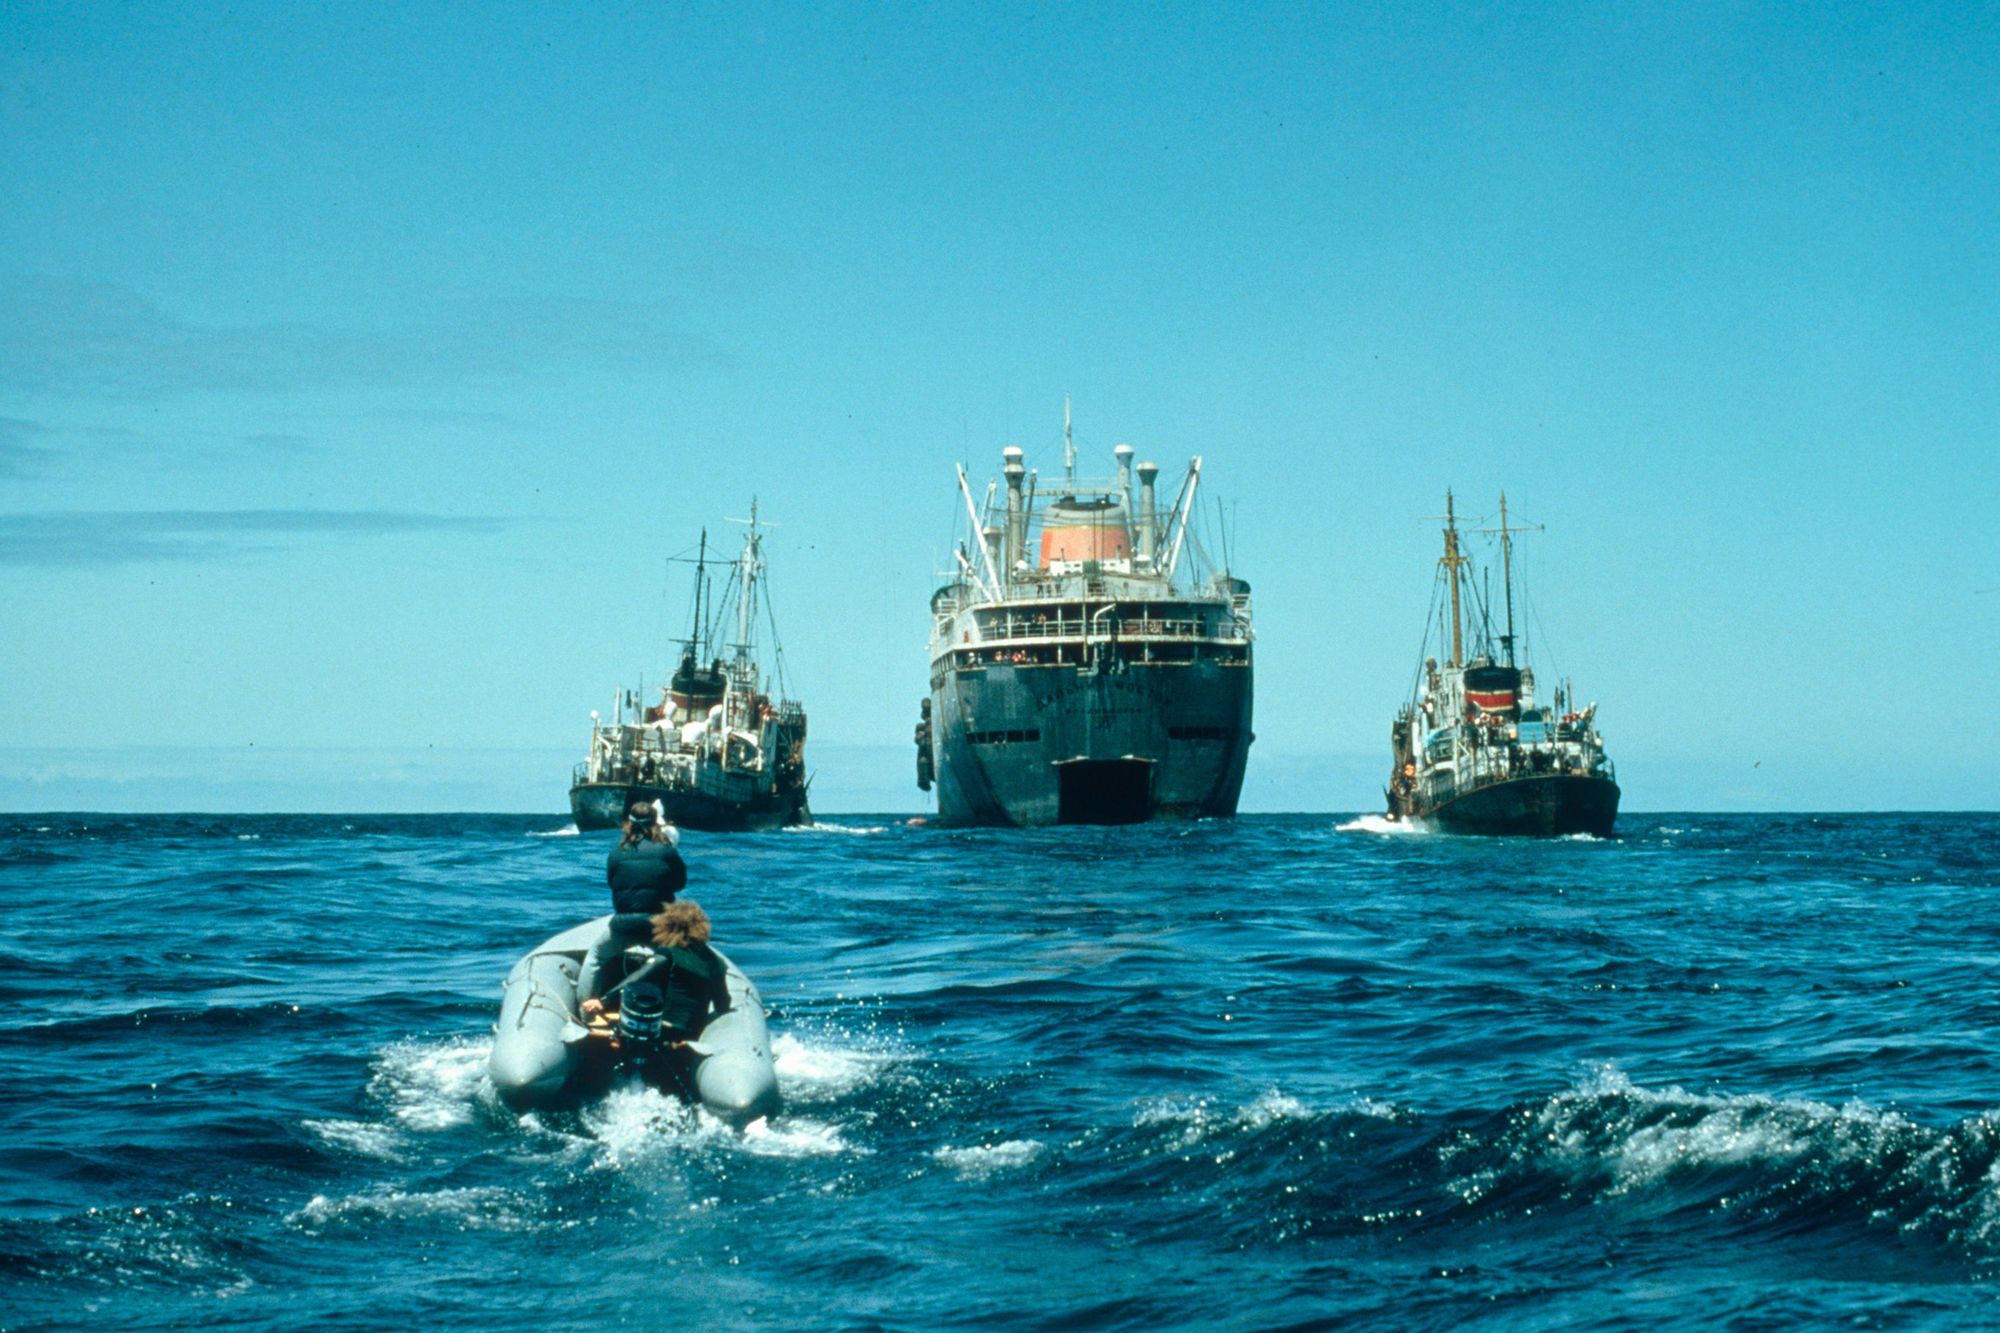 Greenpeace Zodiac approaching Russian whaling fleet, the Dalniy Vostok, and harpoon boats as part of the Project Ahab campaign in the North Pacific.